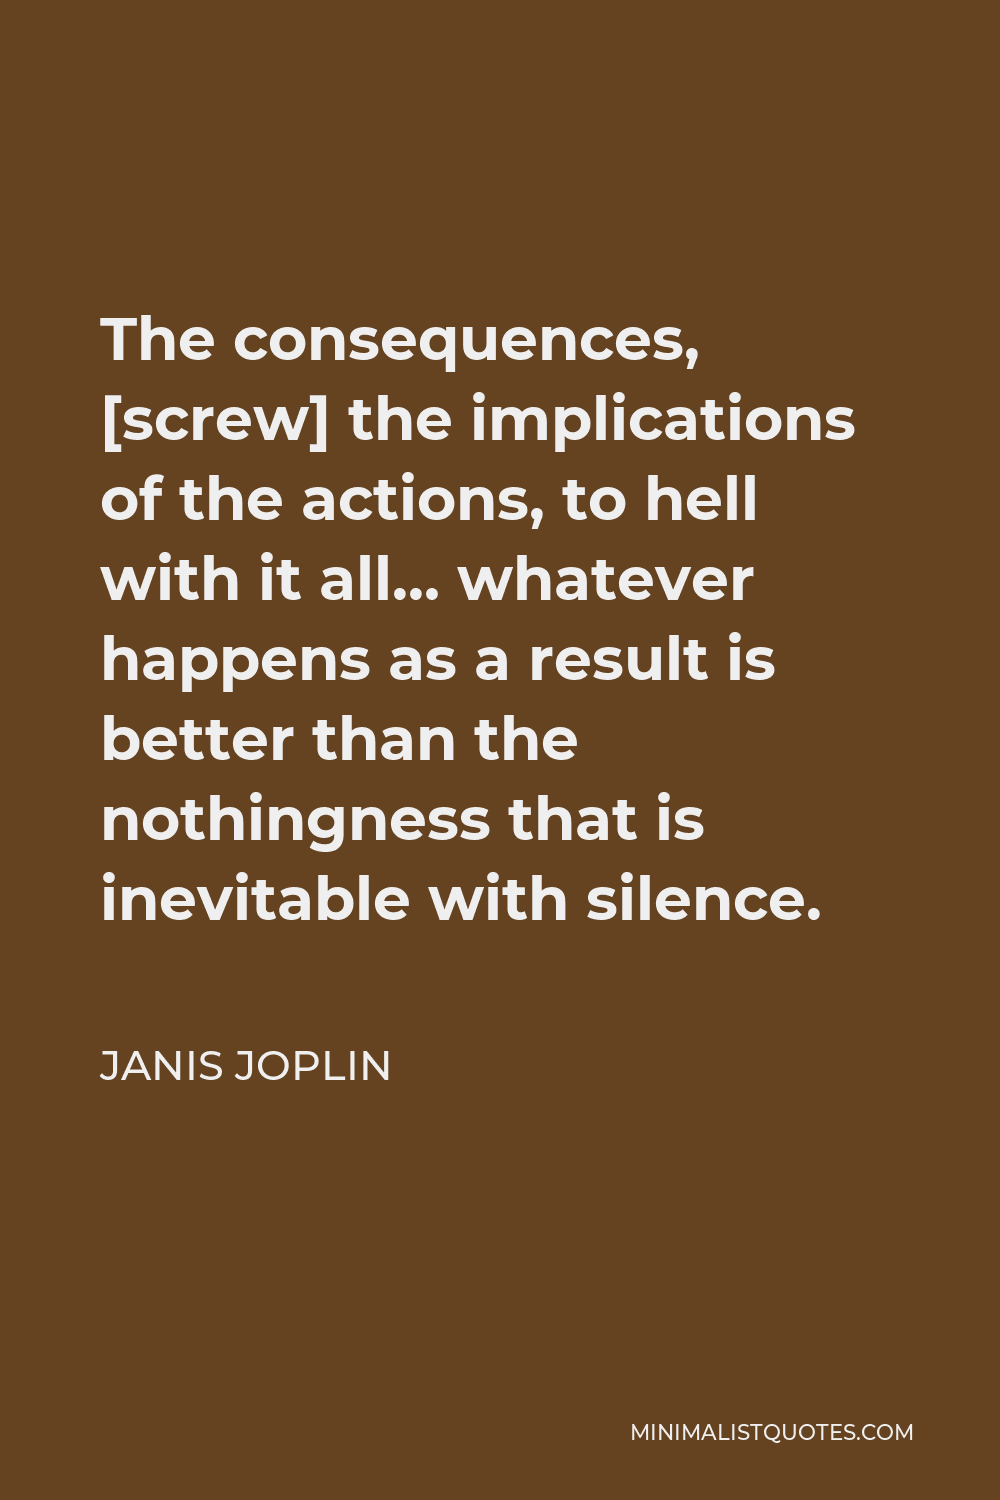 Janis Joplin Quote - The consequences, [screw] the implications of the actions, to hell with it all… whatever happens as a result is better than the nothingness that is inevitable with silence.